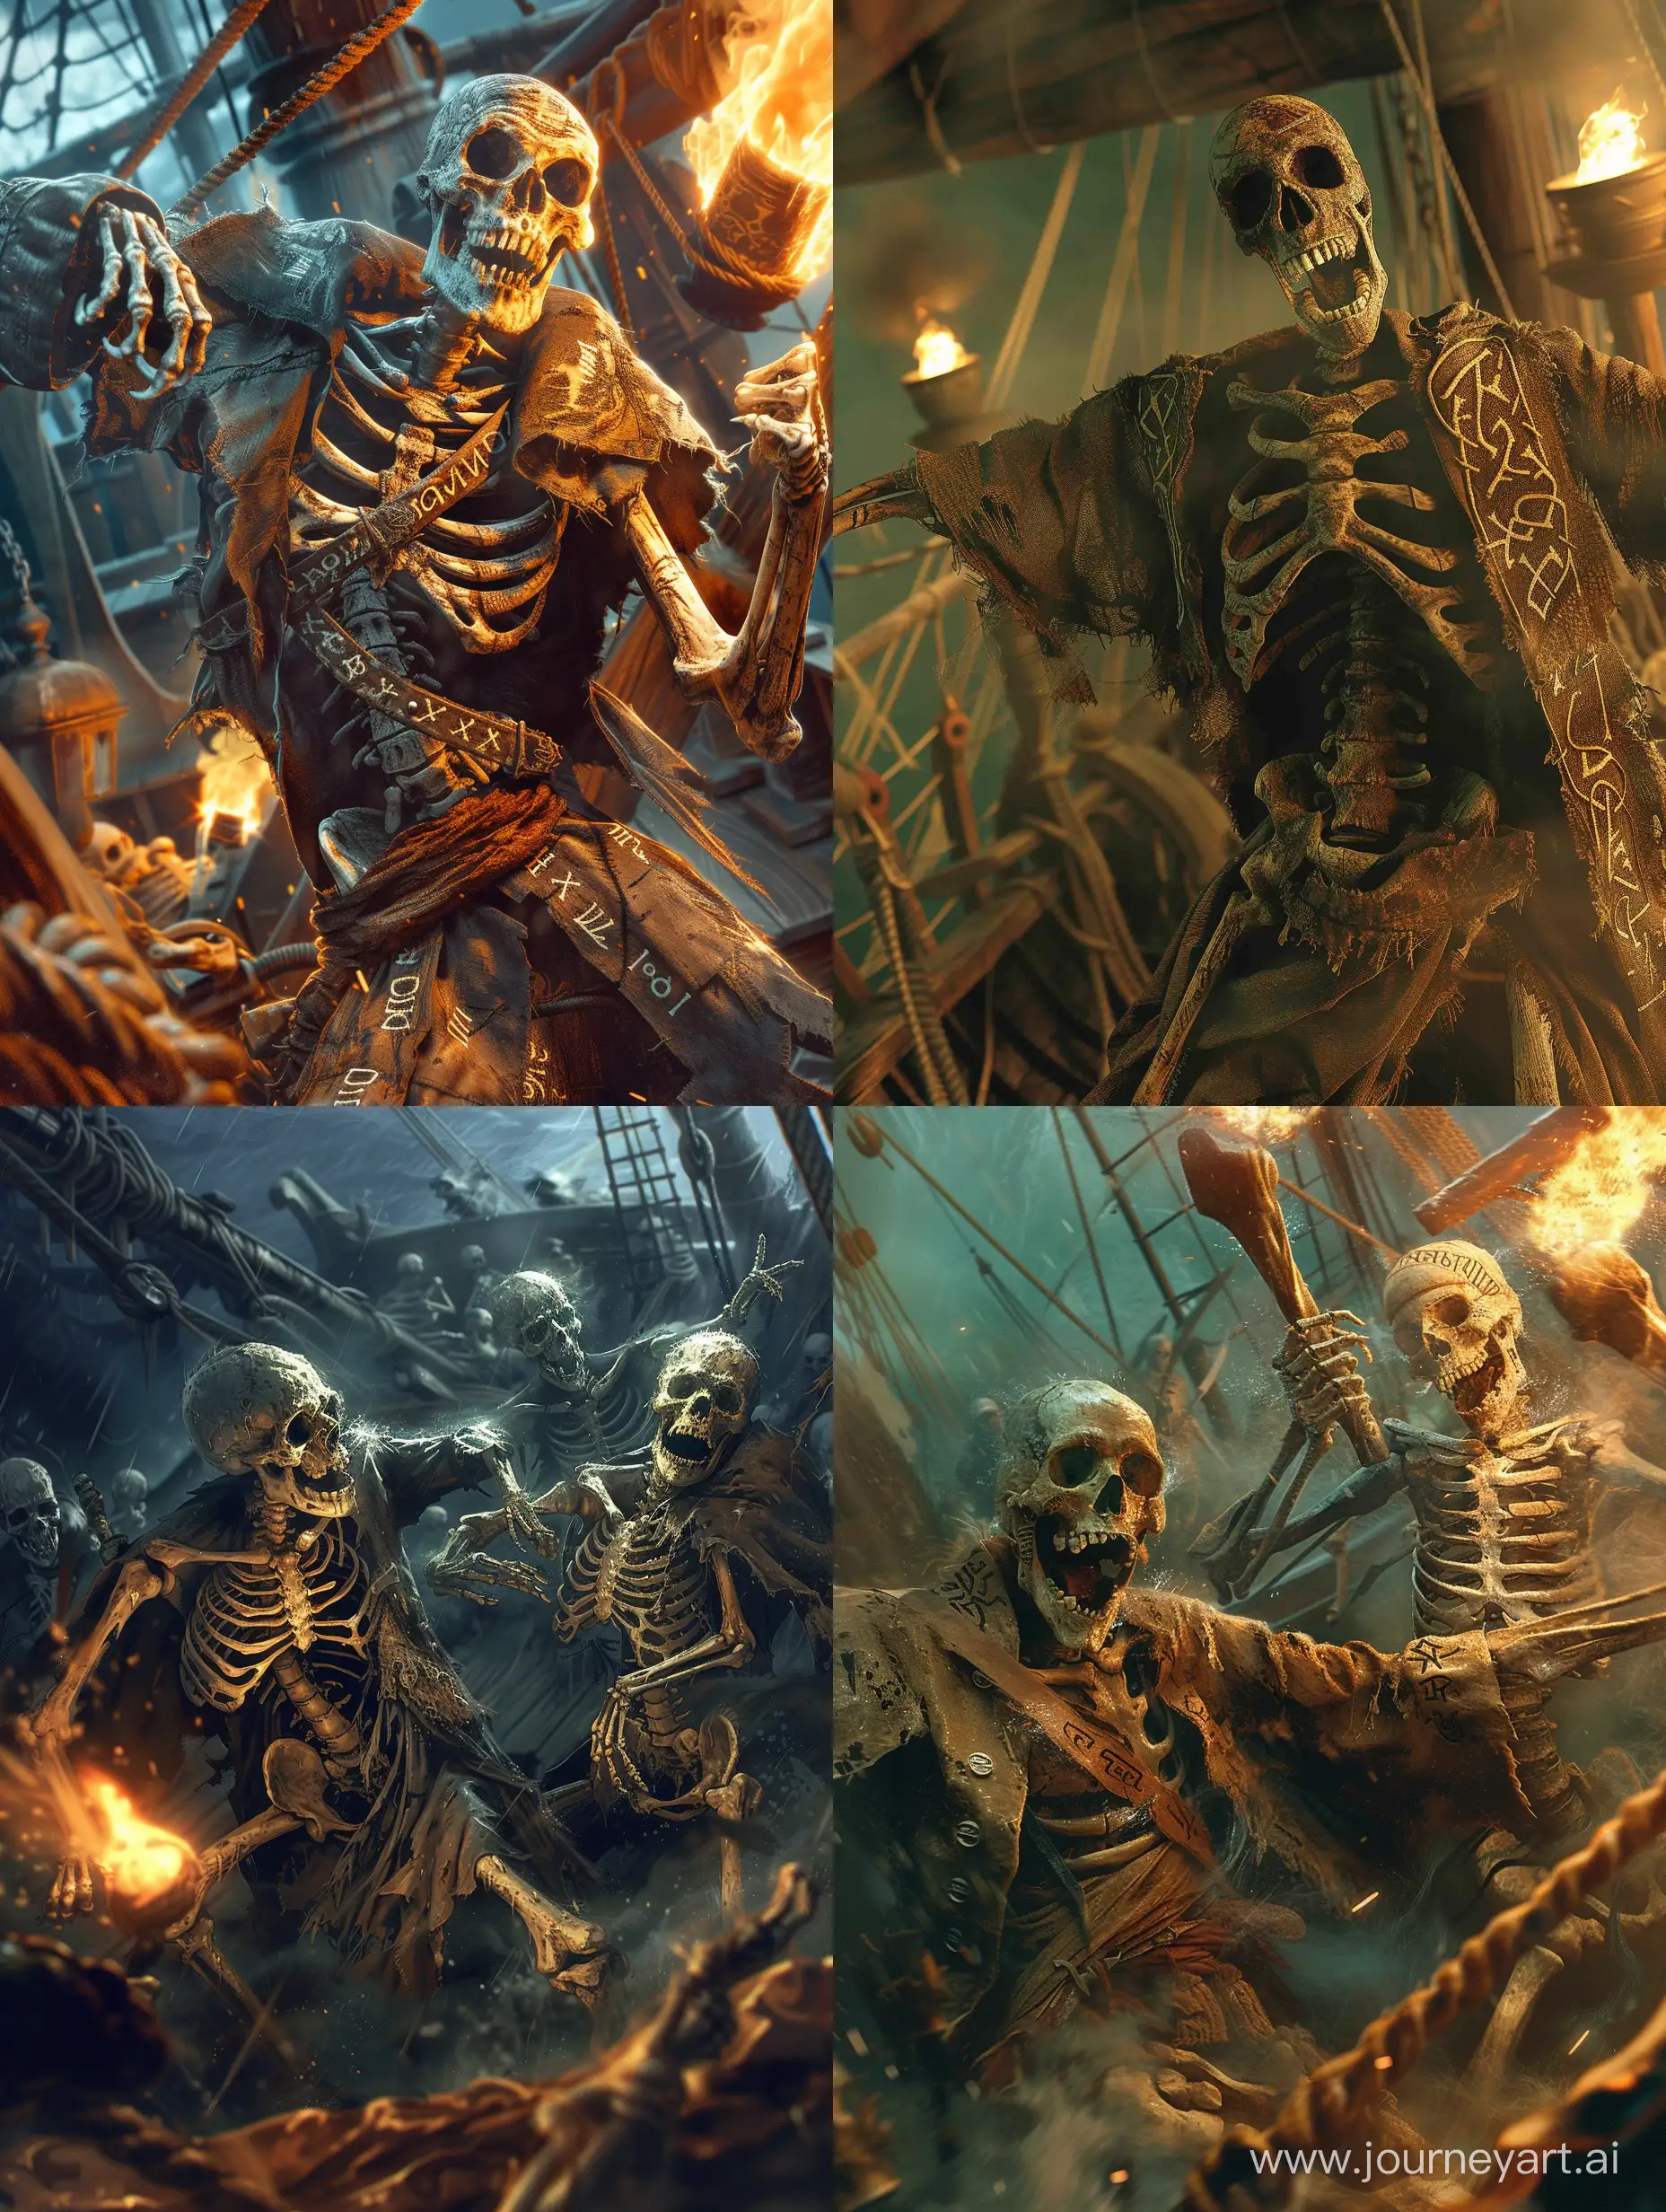 Living skeleton pirates with torn robe,Attacking to a ship,bone weapons,runic script on bones,attacking,Angry,torches that give light to the environment,intricate,incredible detail,terrifying,Digital Art,Imaginary image,fantasy.